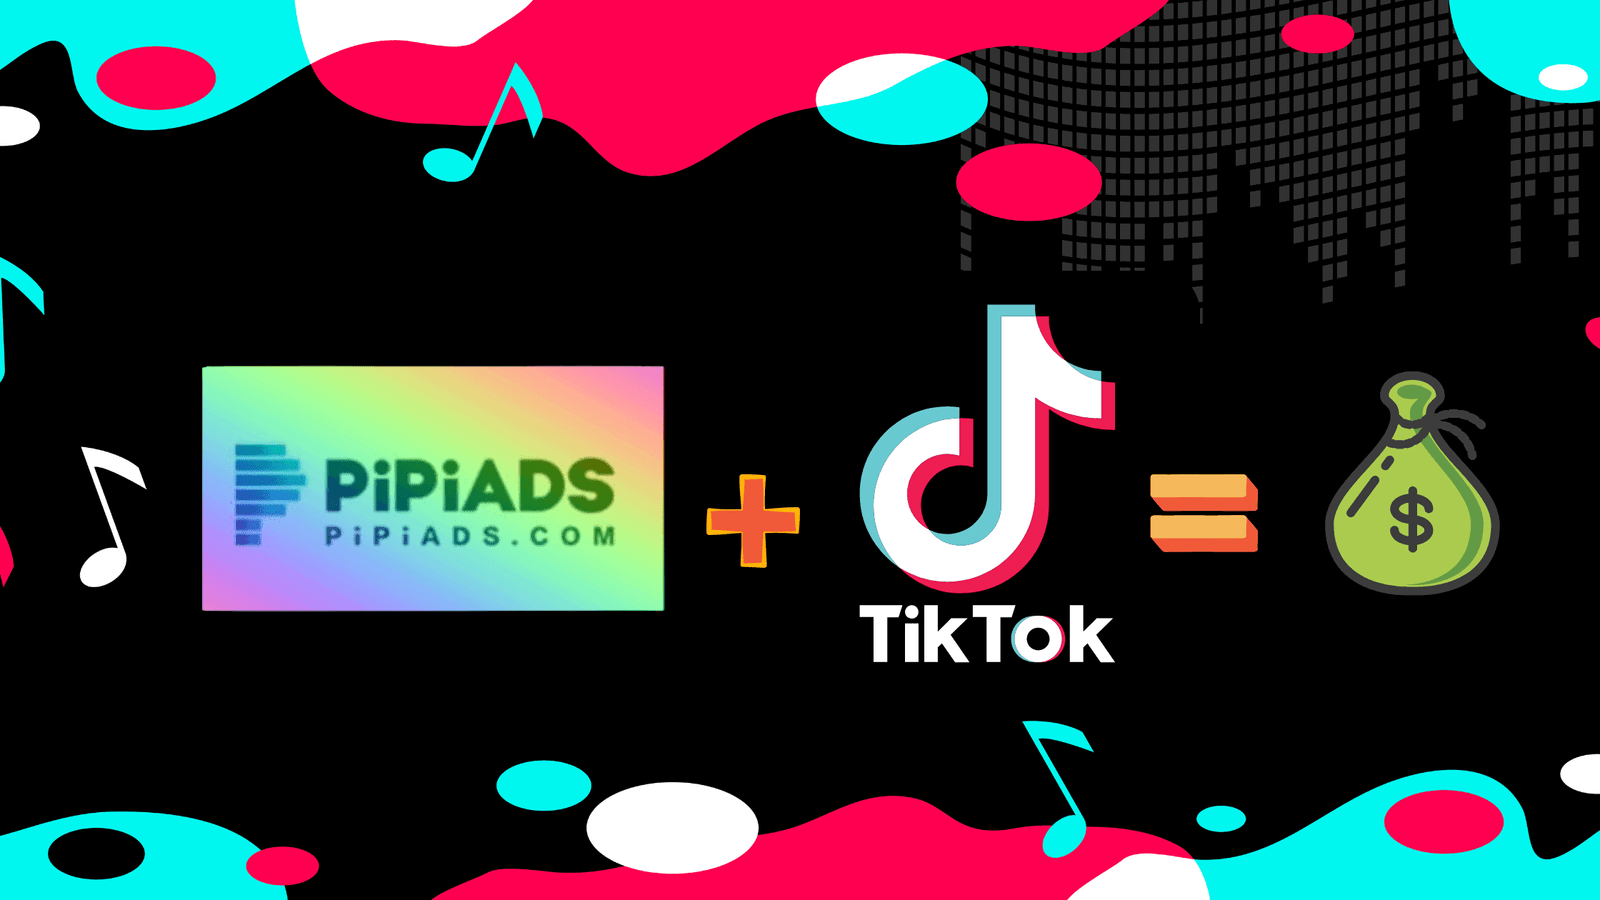 PiPiADS Review